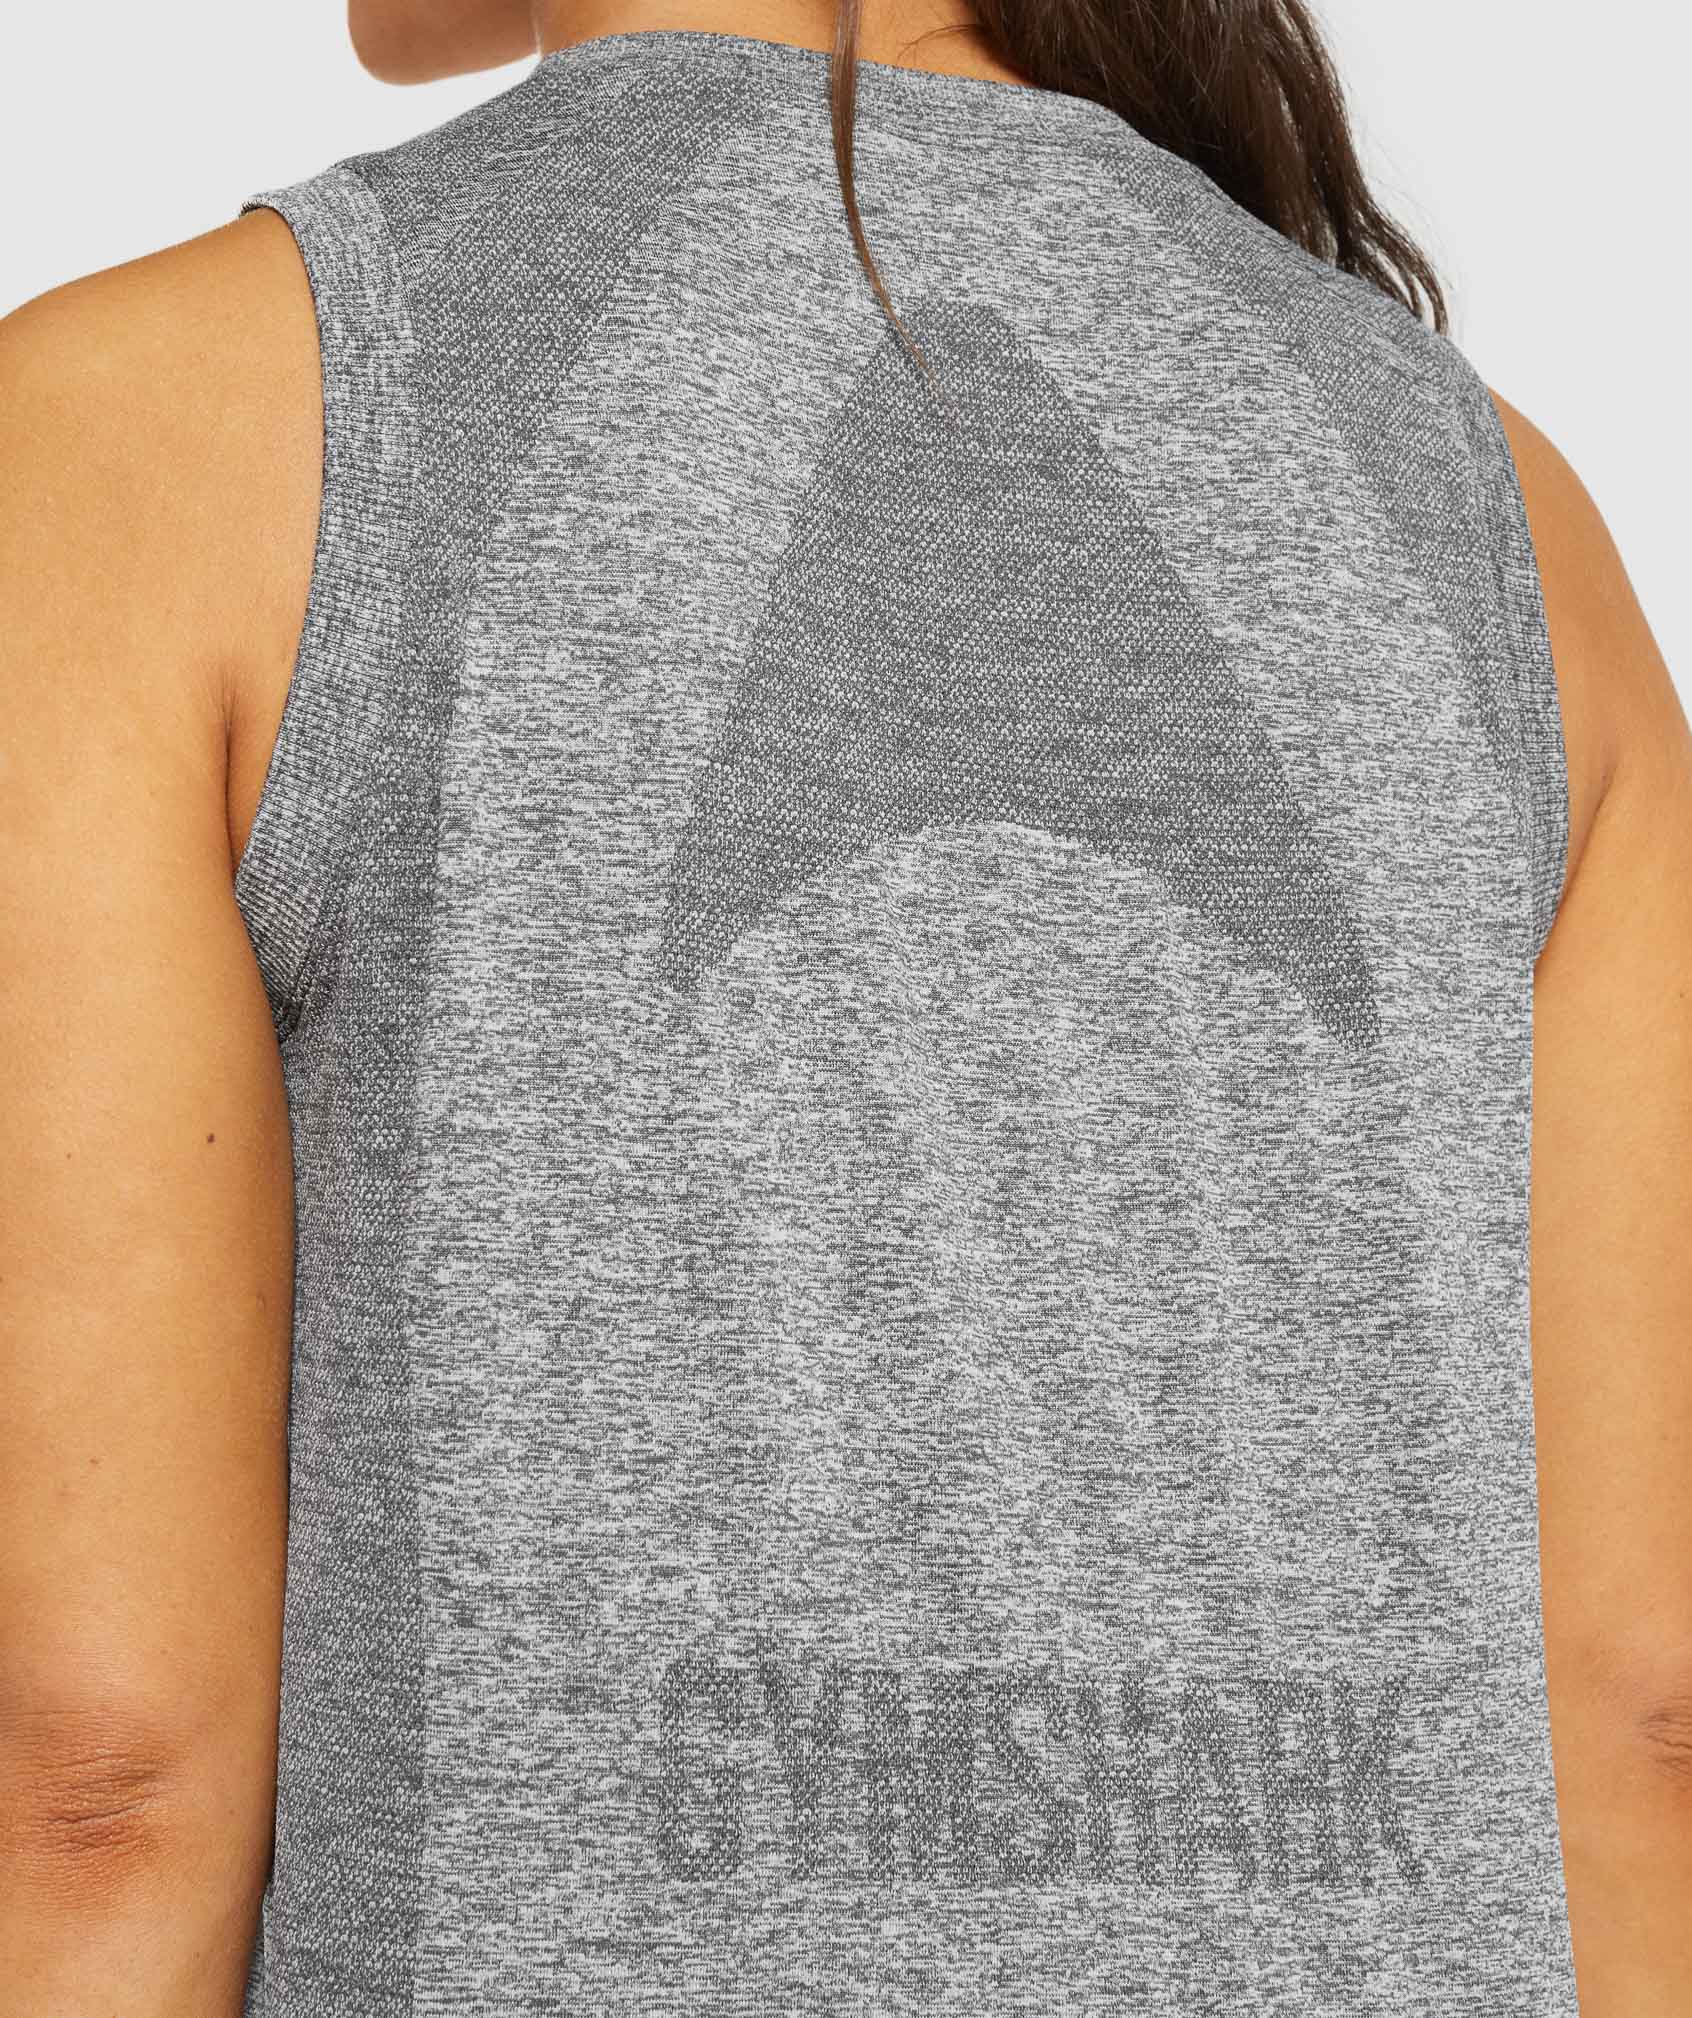 Flex Loose Tank Top in Charcoal Grey Marl - view 6